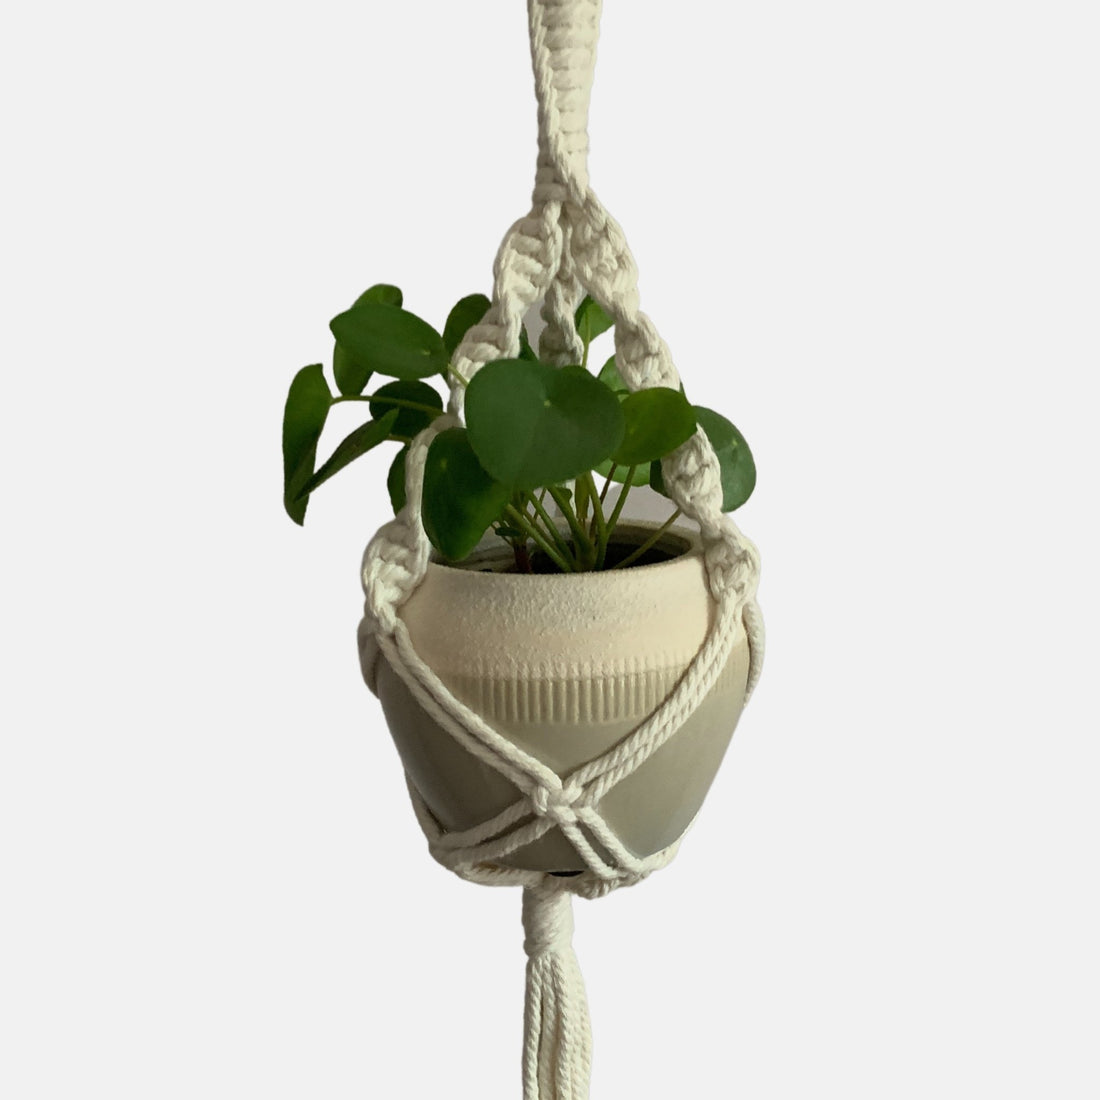 Table and Kitchen fair trade ethical sustainable fashion Hanging Plant Holder conscious purchase Thai Village